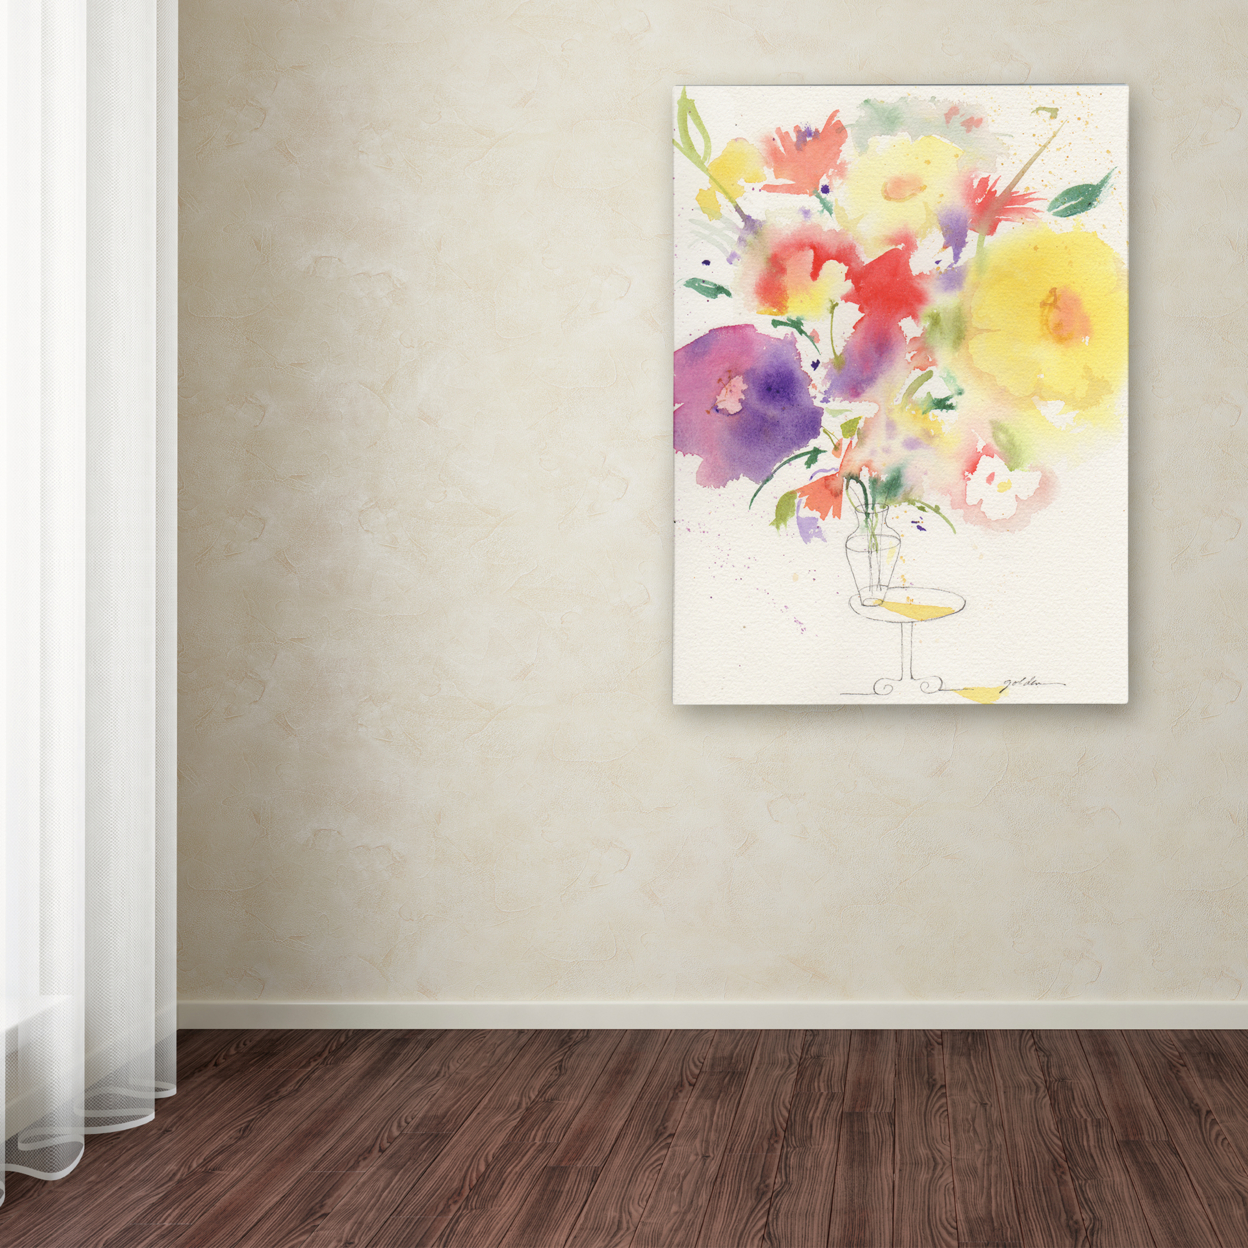 Sheila Golden 'Holiday Bouquet' Canvas Wall Art 35 X 47 Inches